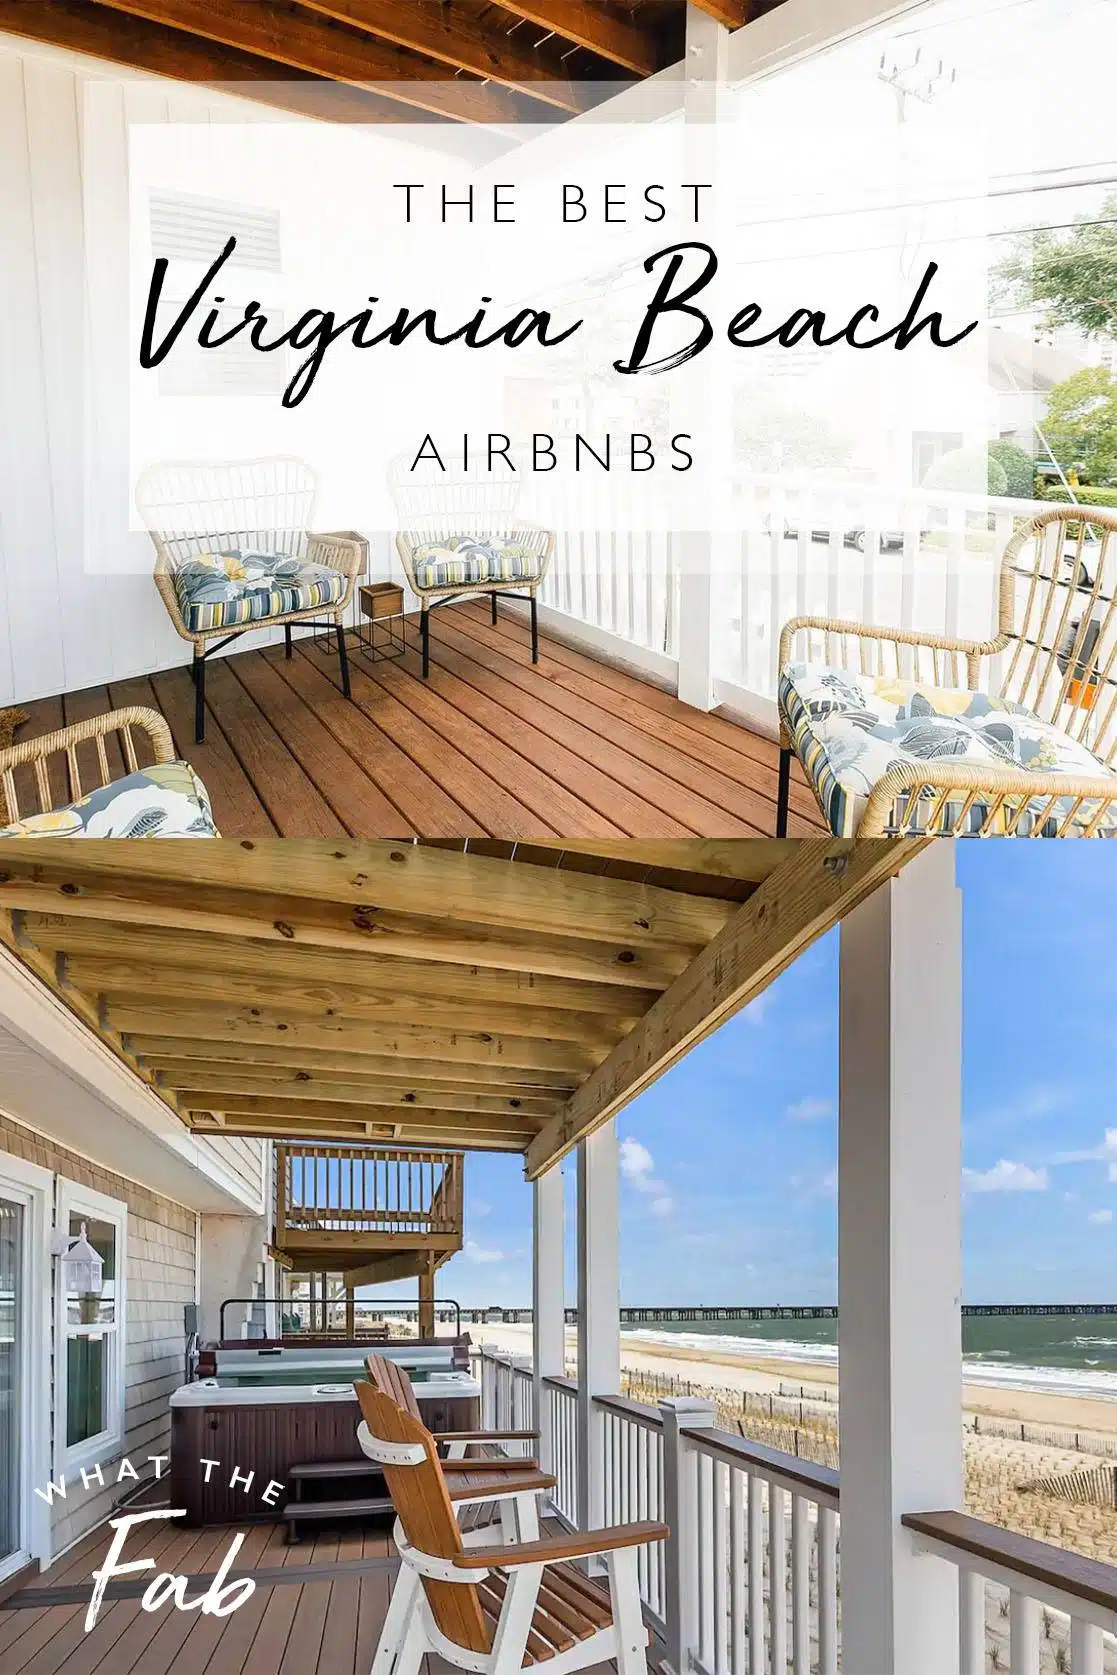 Airbnb Virginia Beach, by Travel Blogger What The Fab